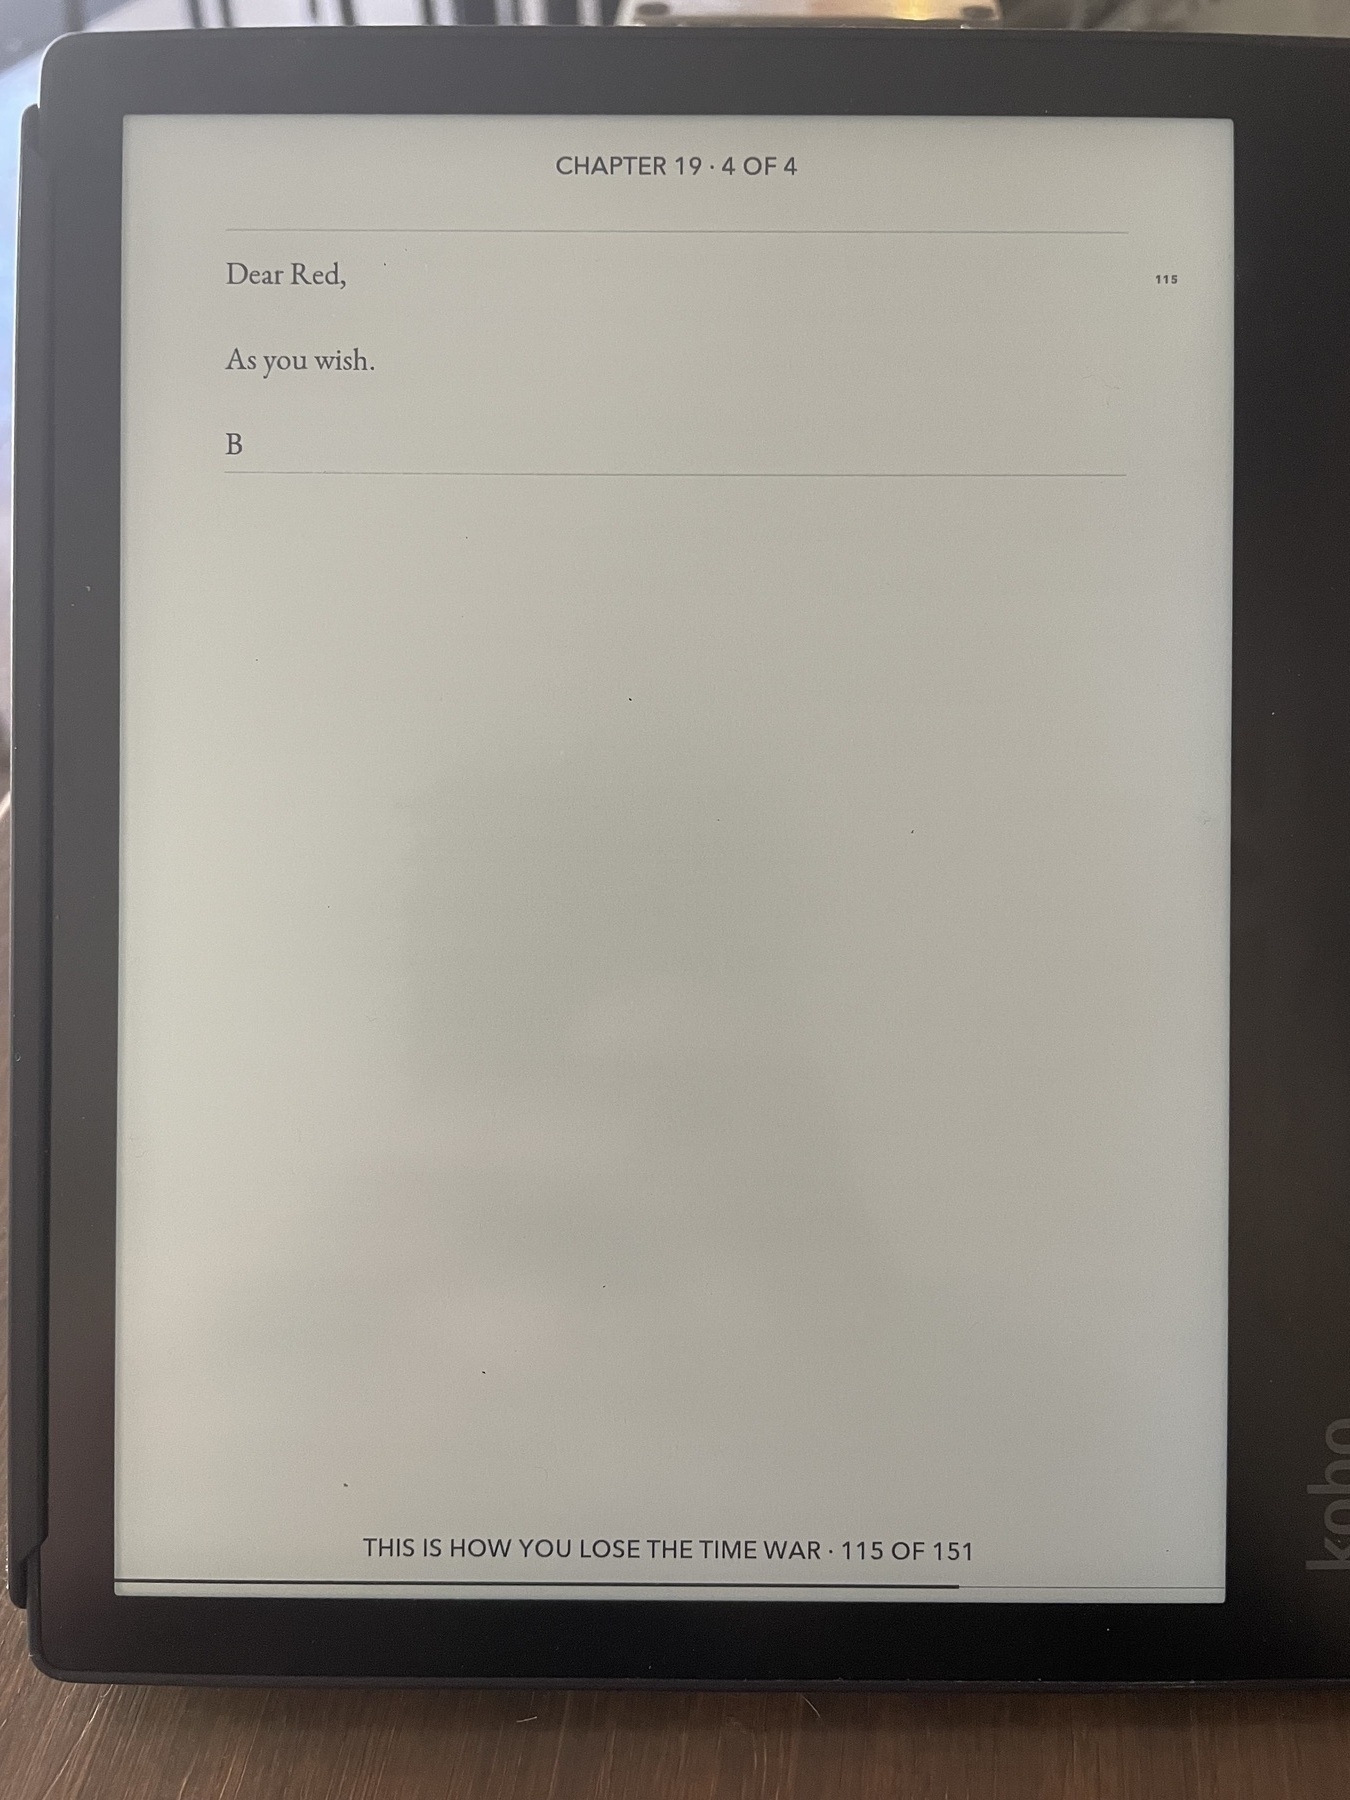 An e-reader screen showing the 115th page of _This Is How You Lose The Time War_, with a passage in the form of a letter: “Dead Red, As you wish. B”. 